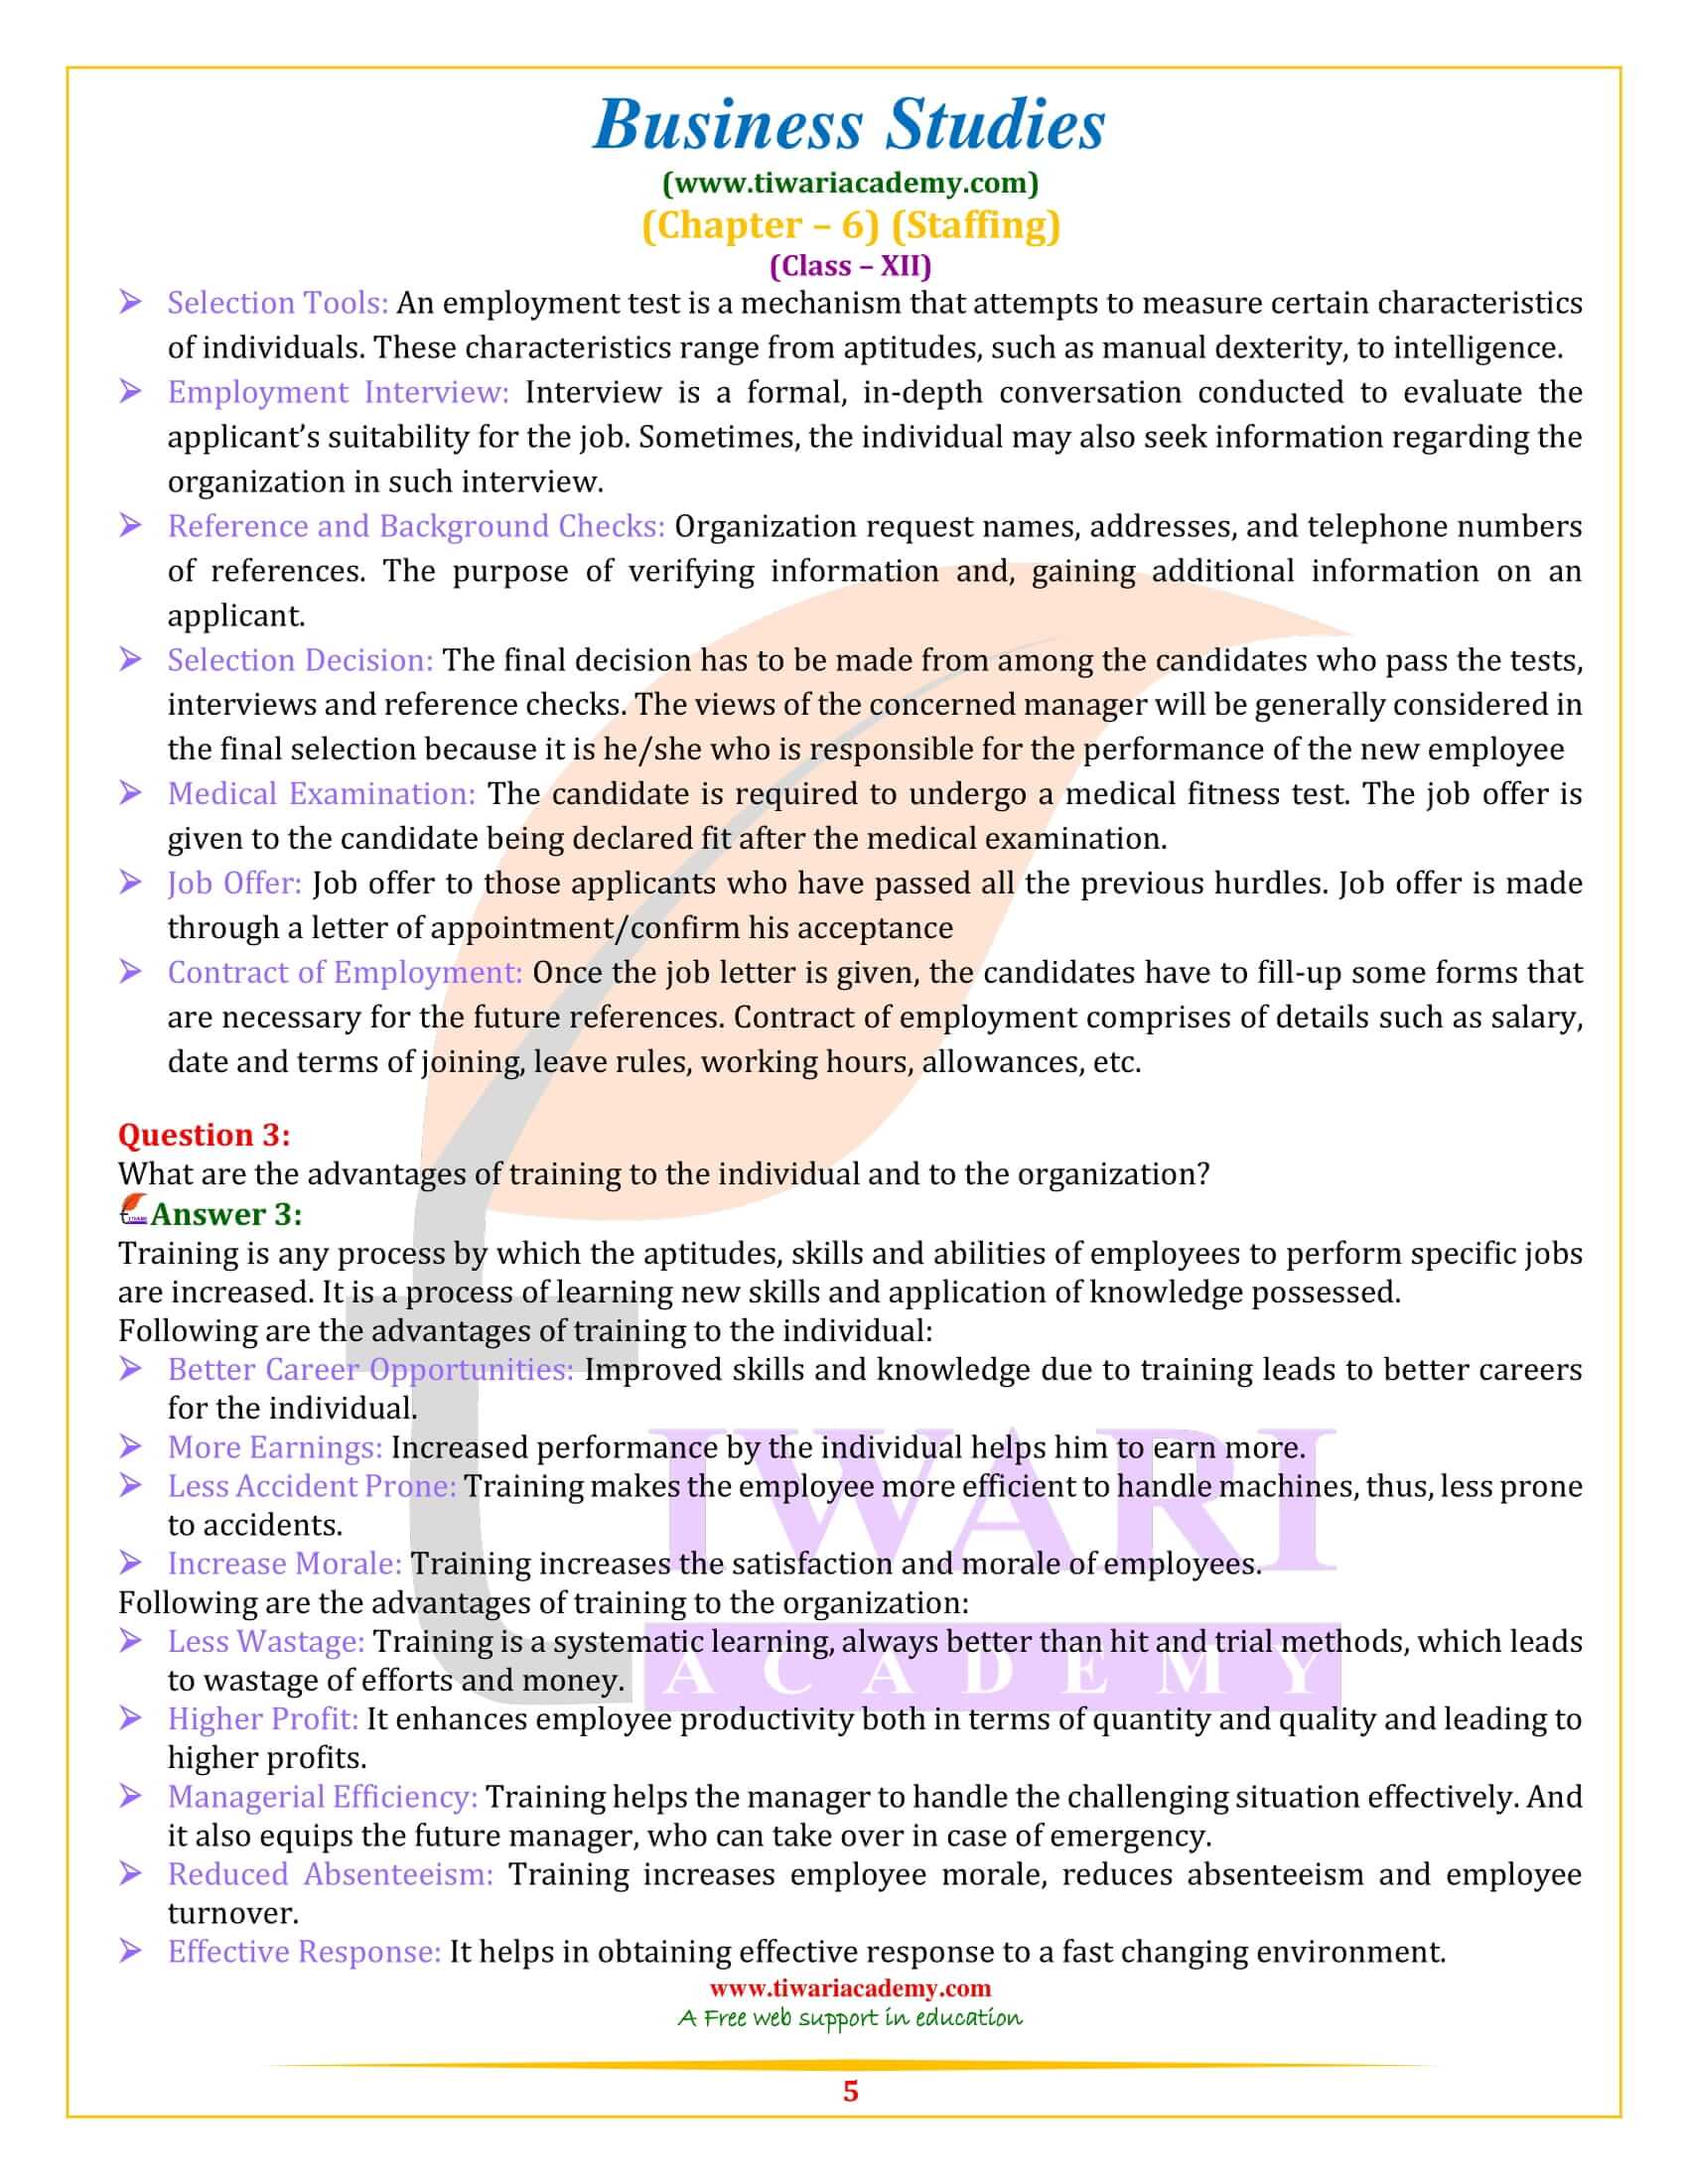 NCERT Solutions for Class 12 Business Studies Chapter 6 updated